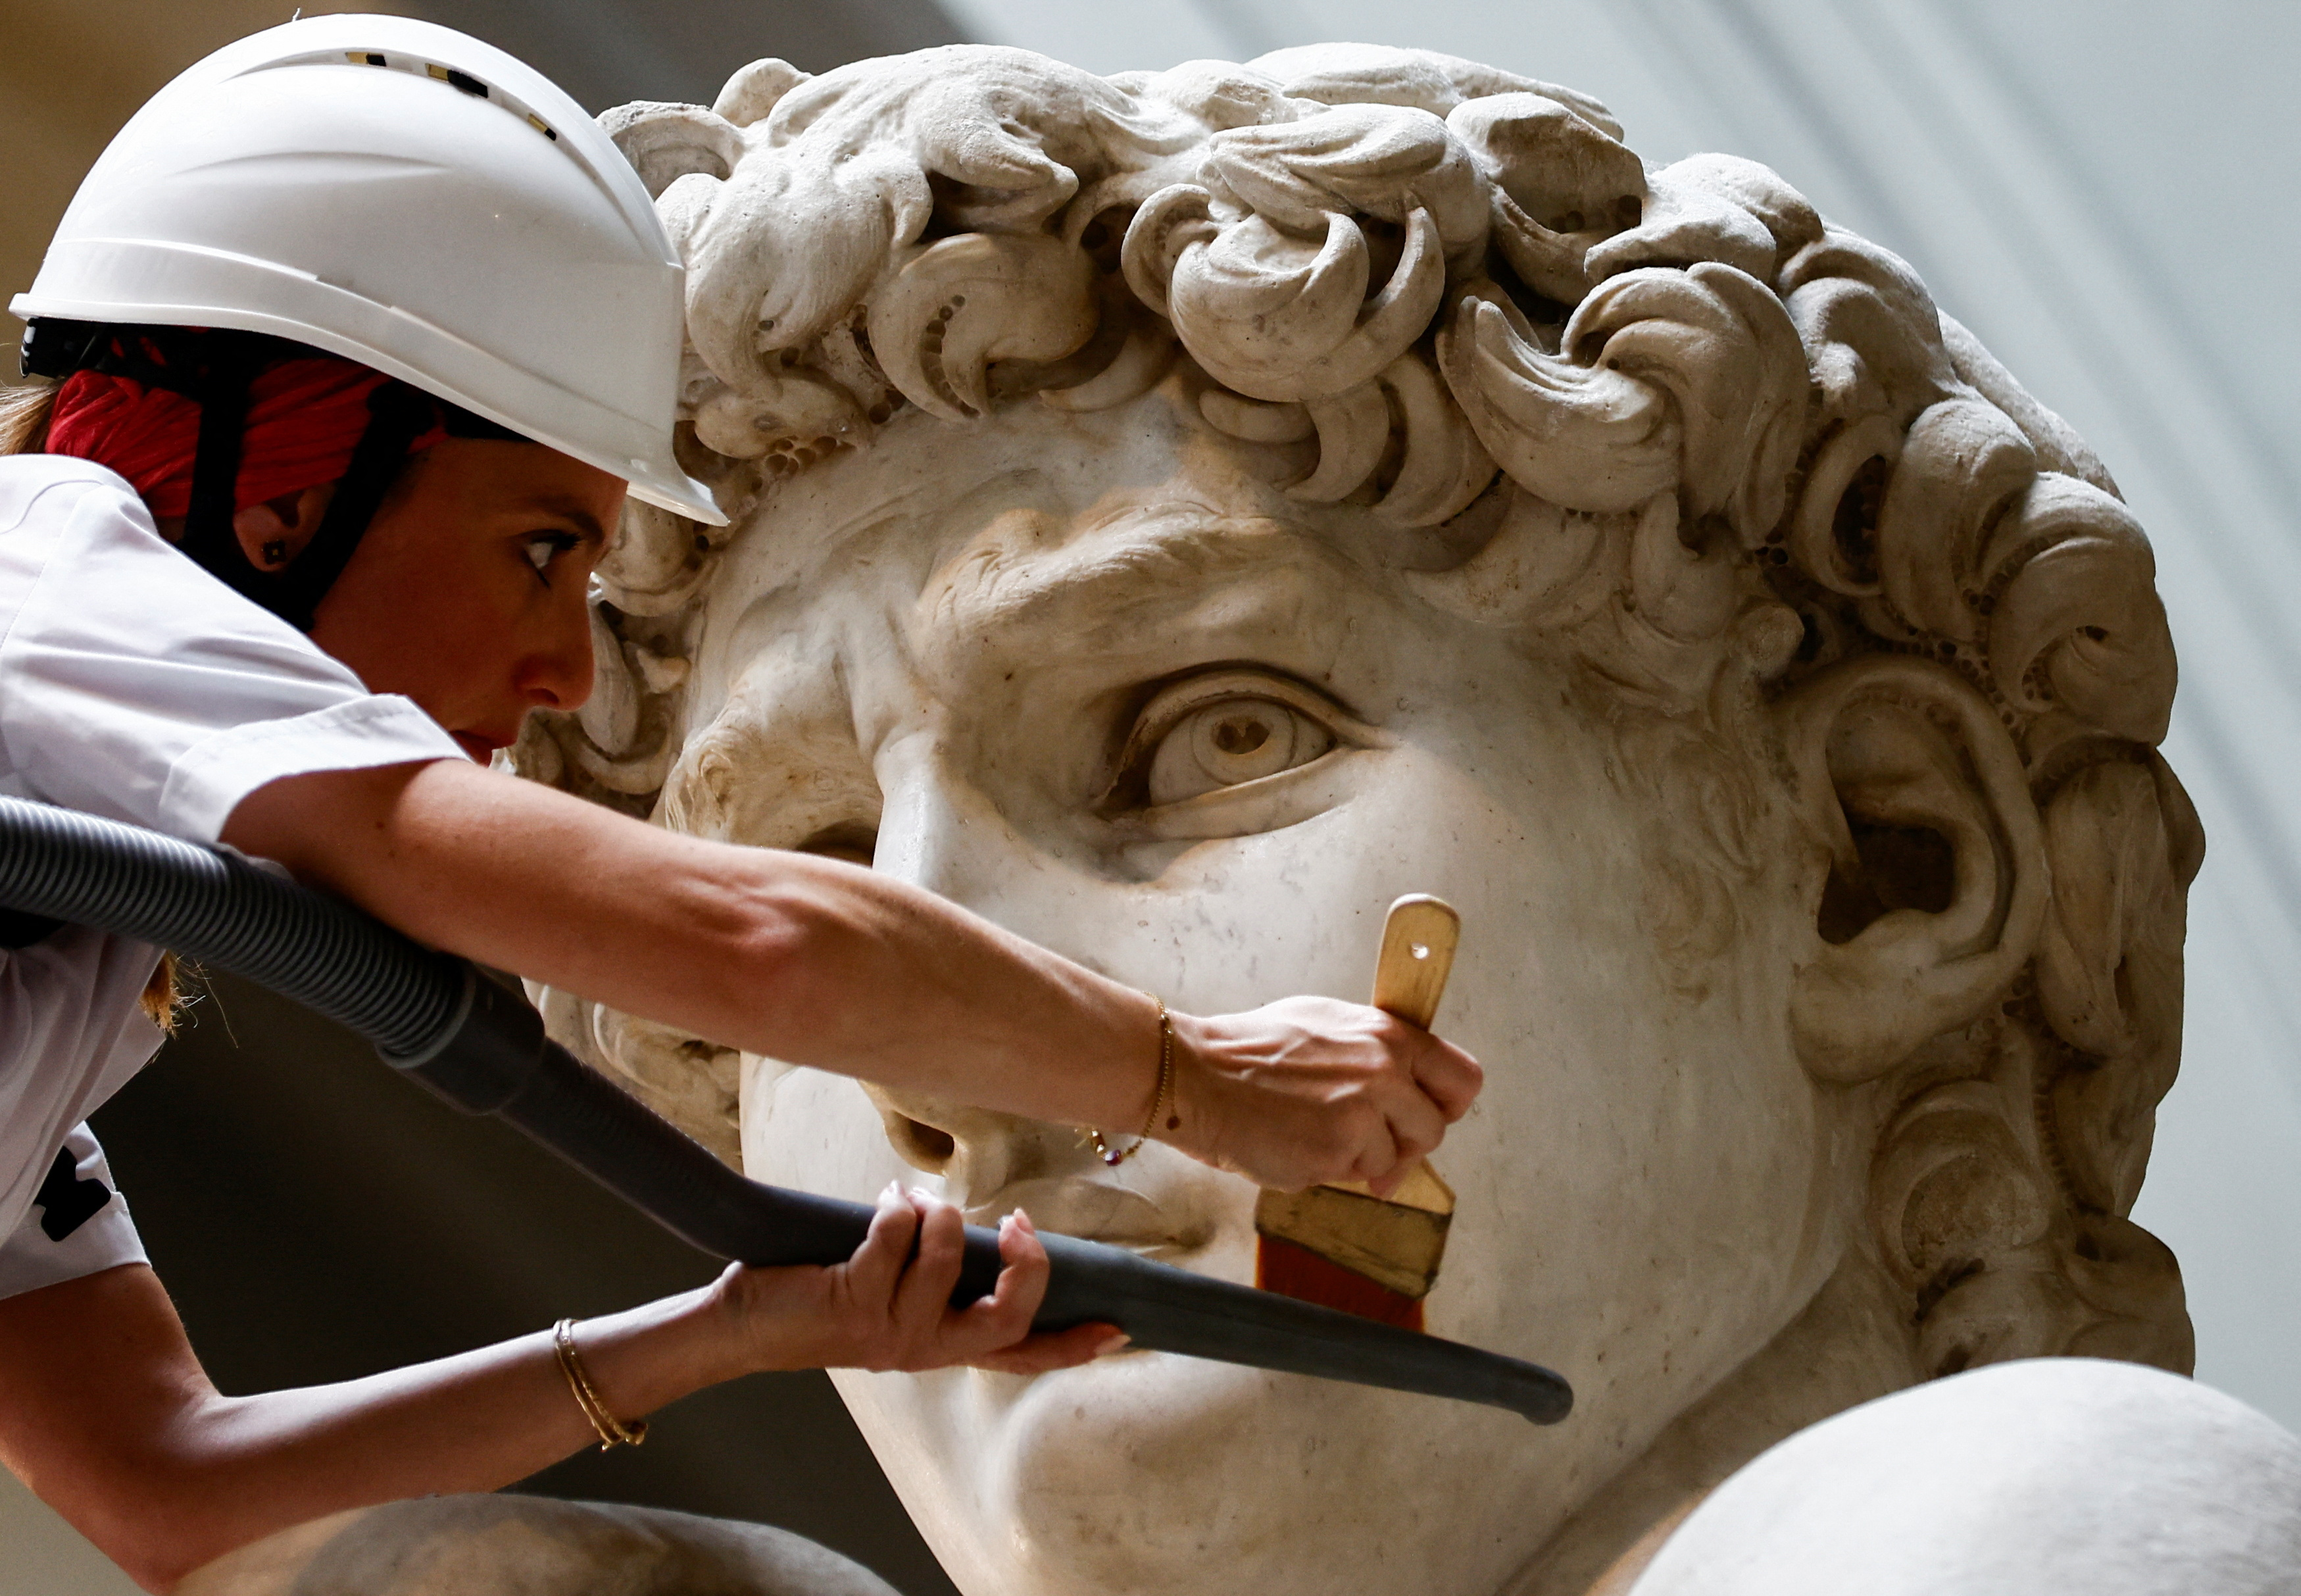 Restoration expert Eleonora Pucci uses a range of delicate cleaning tools to clean David's delicate features, but she admits one false move could cause damage to the famous statue. /Yara Nardi/Reuters